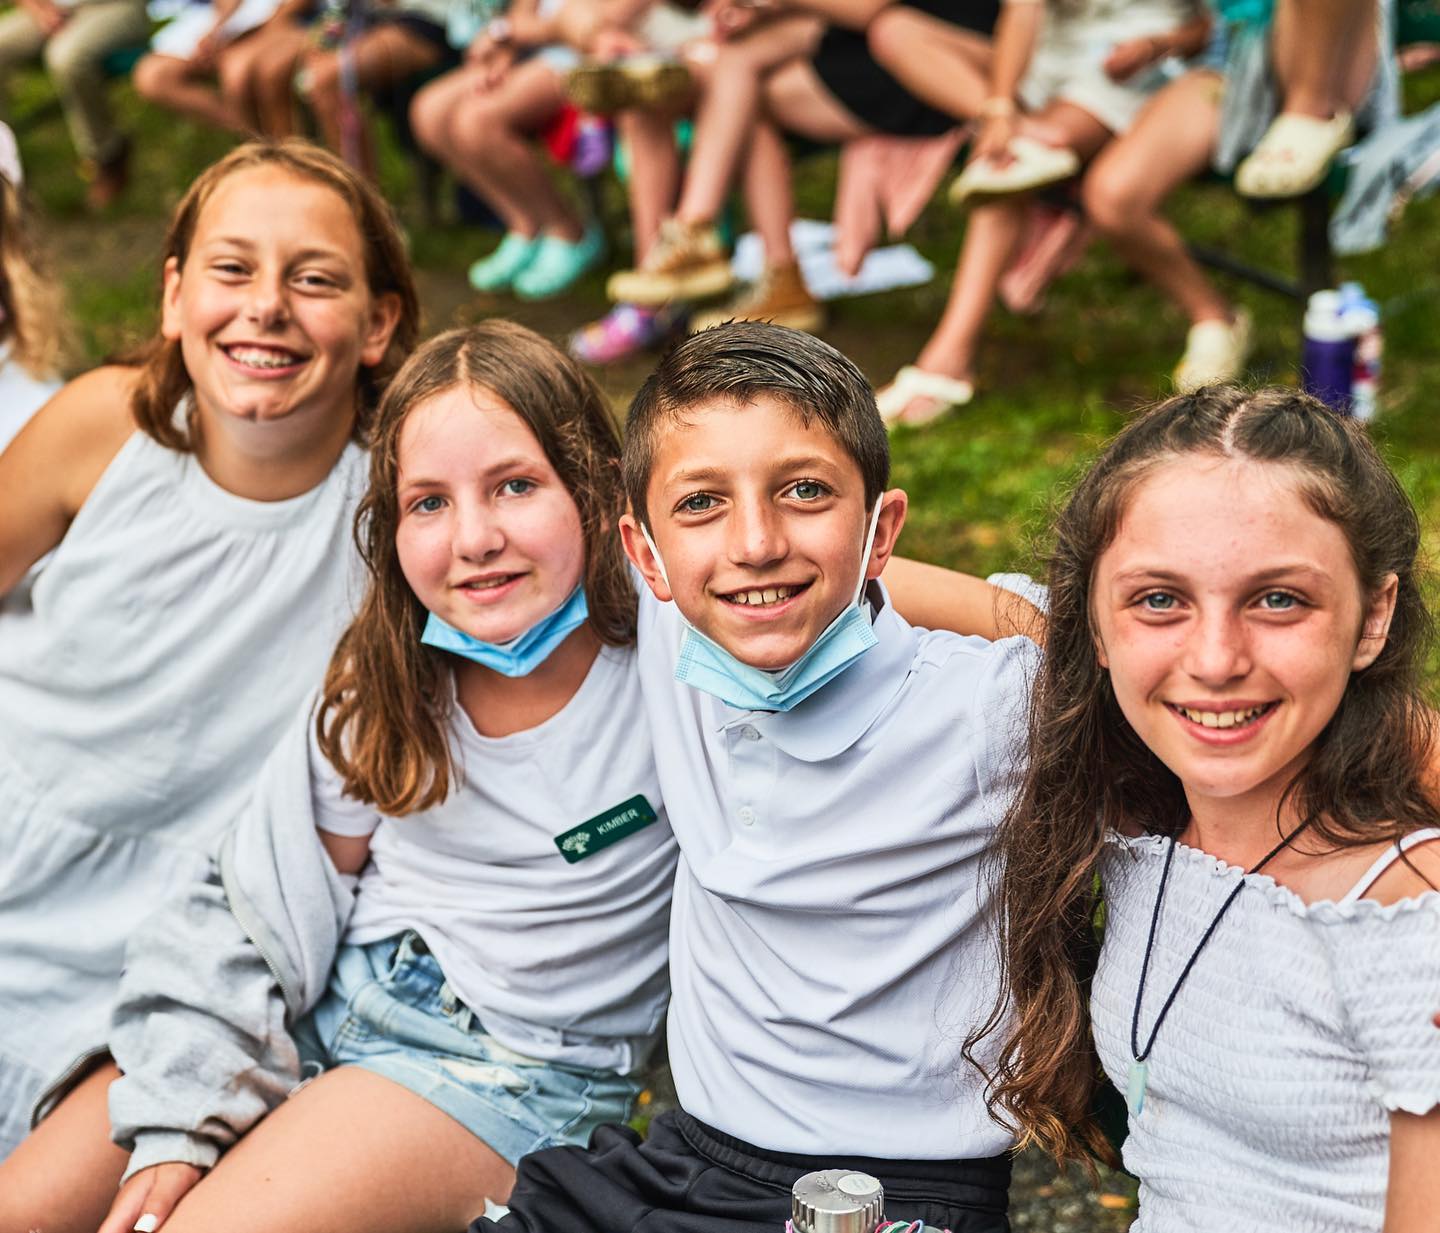 Shabbat Shalom Eisner Camp! We can’t wait to see you all back at camp so soon!!